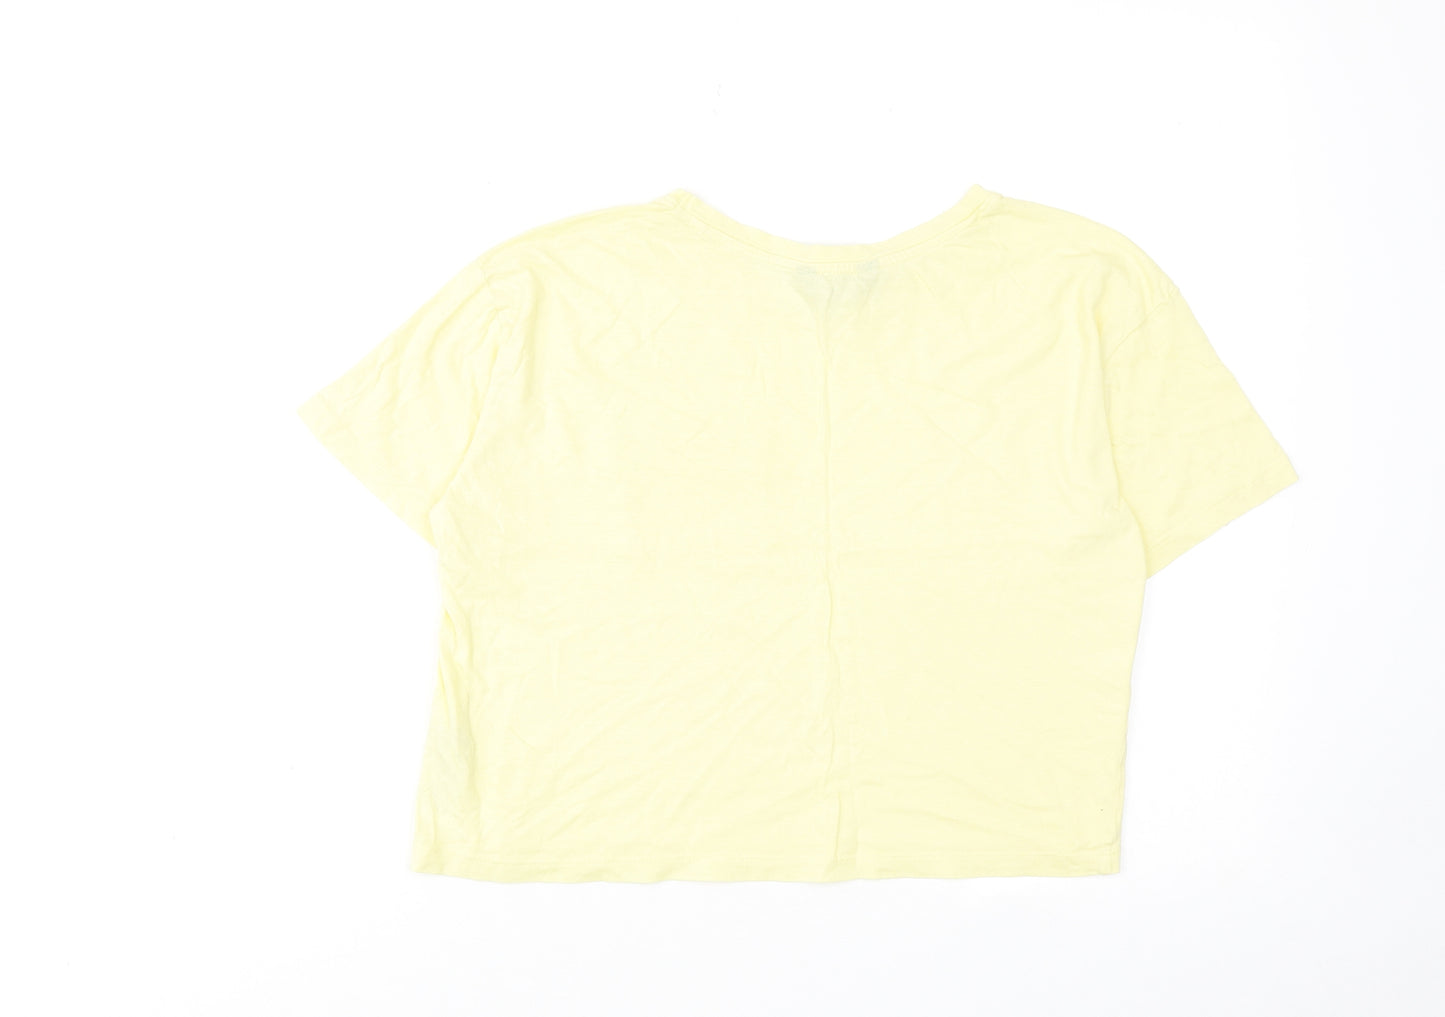 New Look Womens Yellow Cotton Basic T-Shirt Size 8 Boat Neck